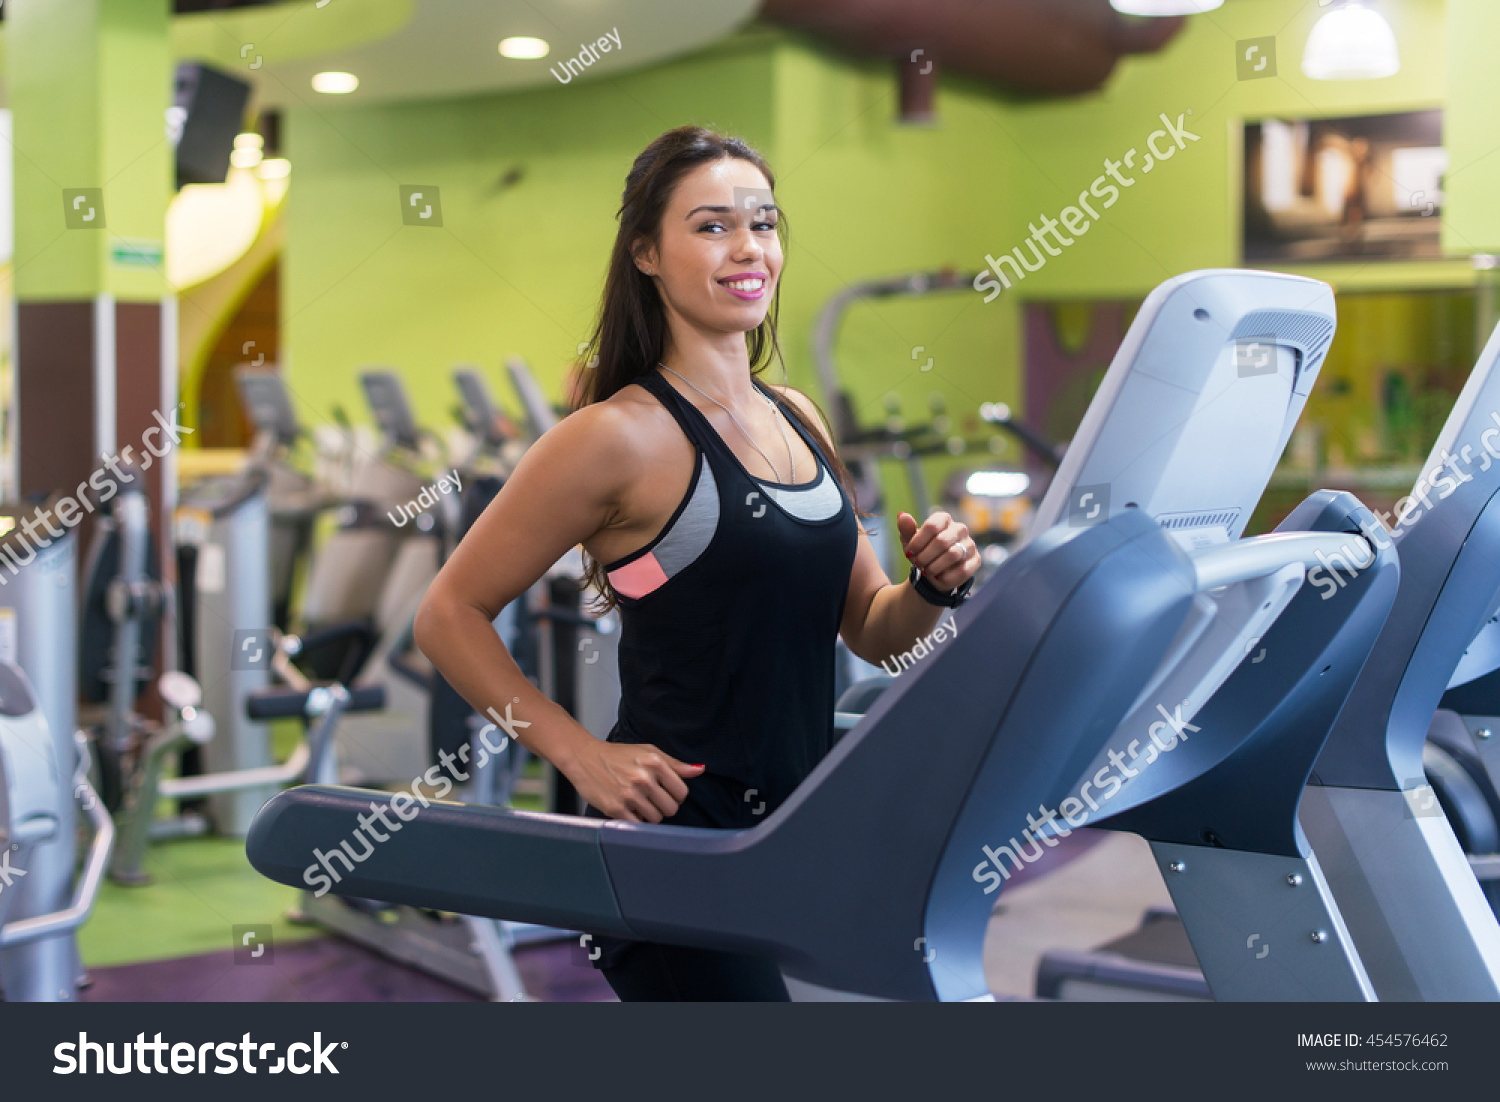 Fit women doing cardio exercises, running on treadmills in the gym